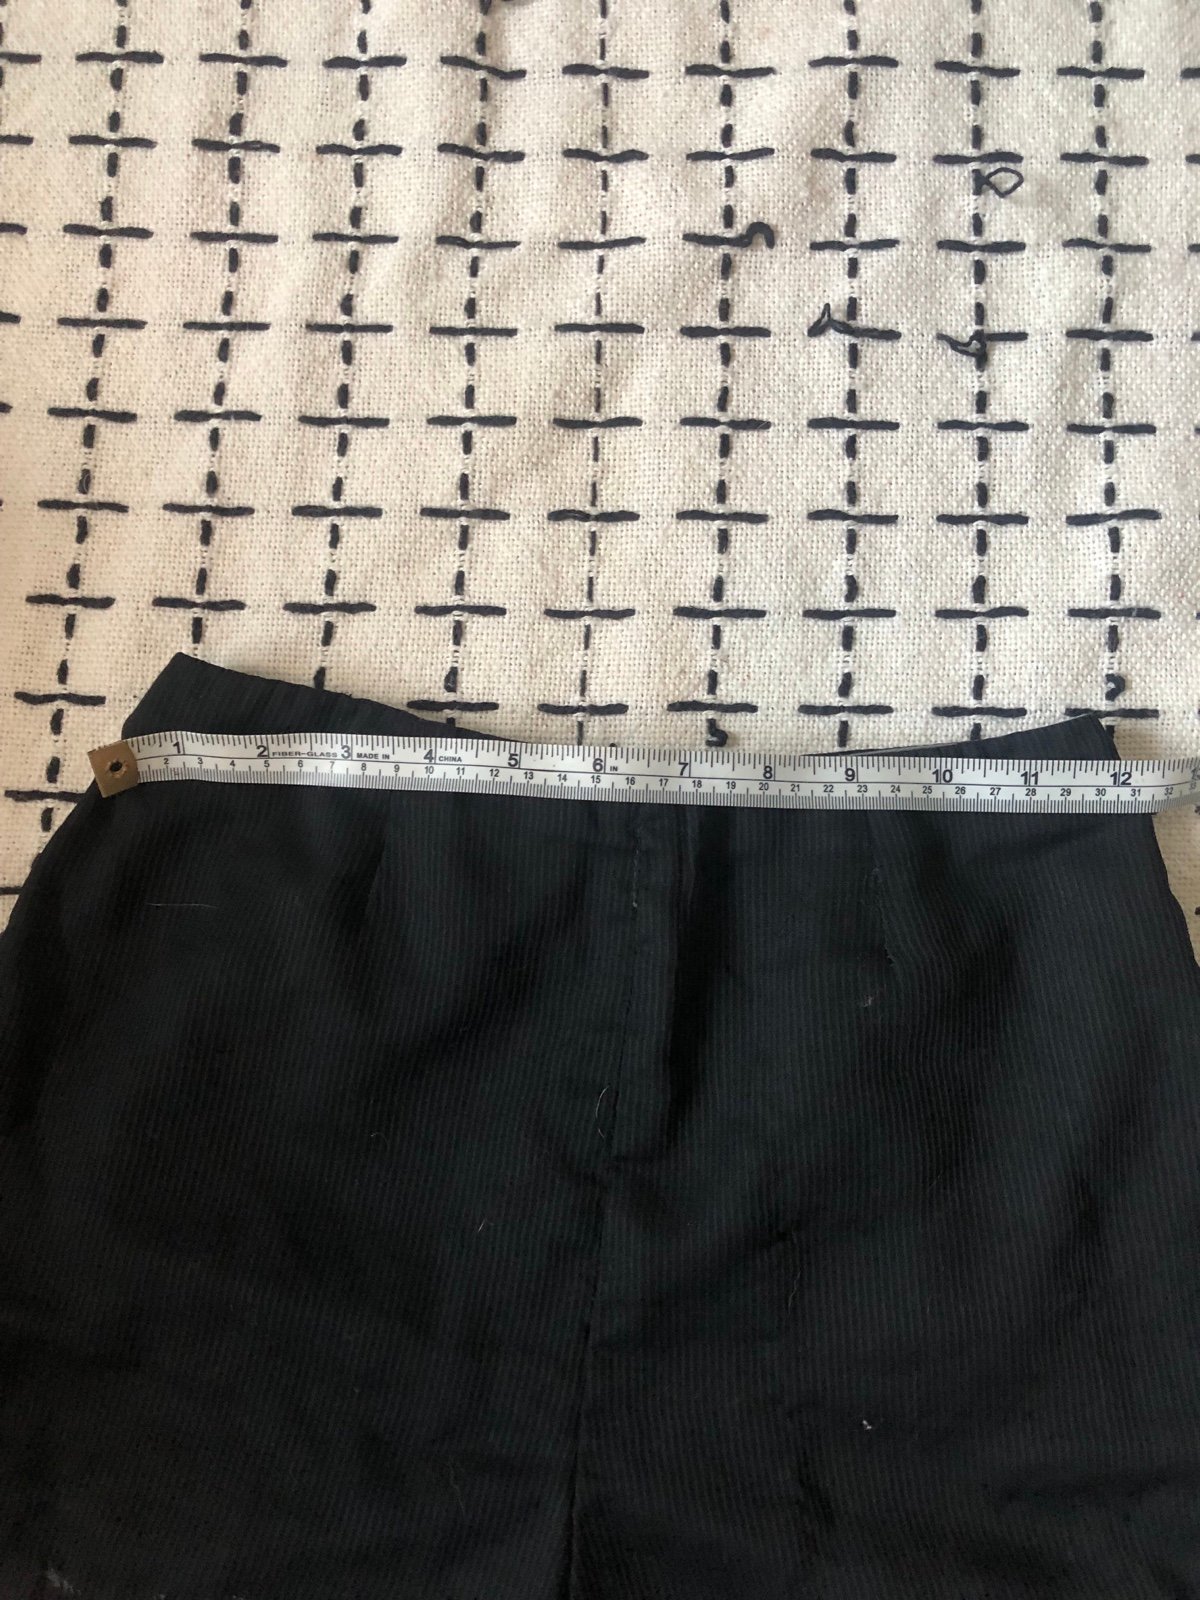 the Lowest price Vintage High Waisted Shorts 24” kgs1RoBjJ Online Exclusive